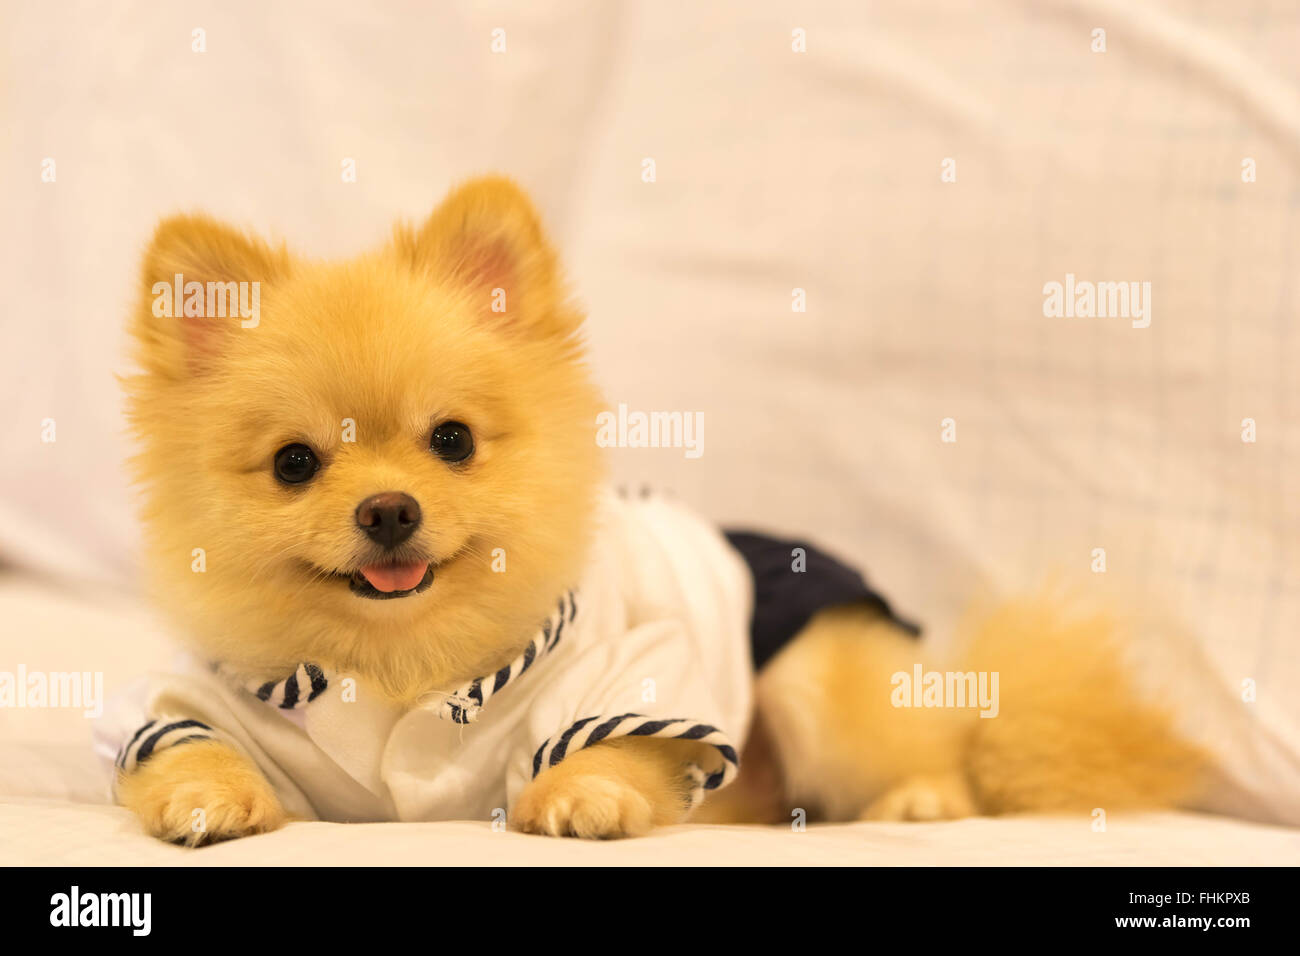 Cute pomeranian dog wearing student shirt, smiling on the sofa with copy space Stock Photo